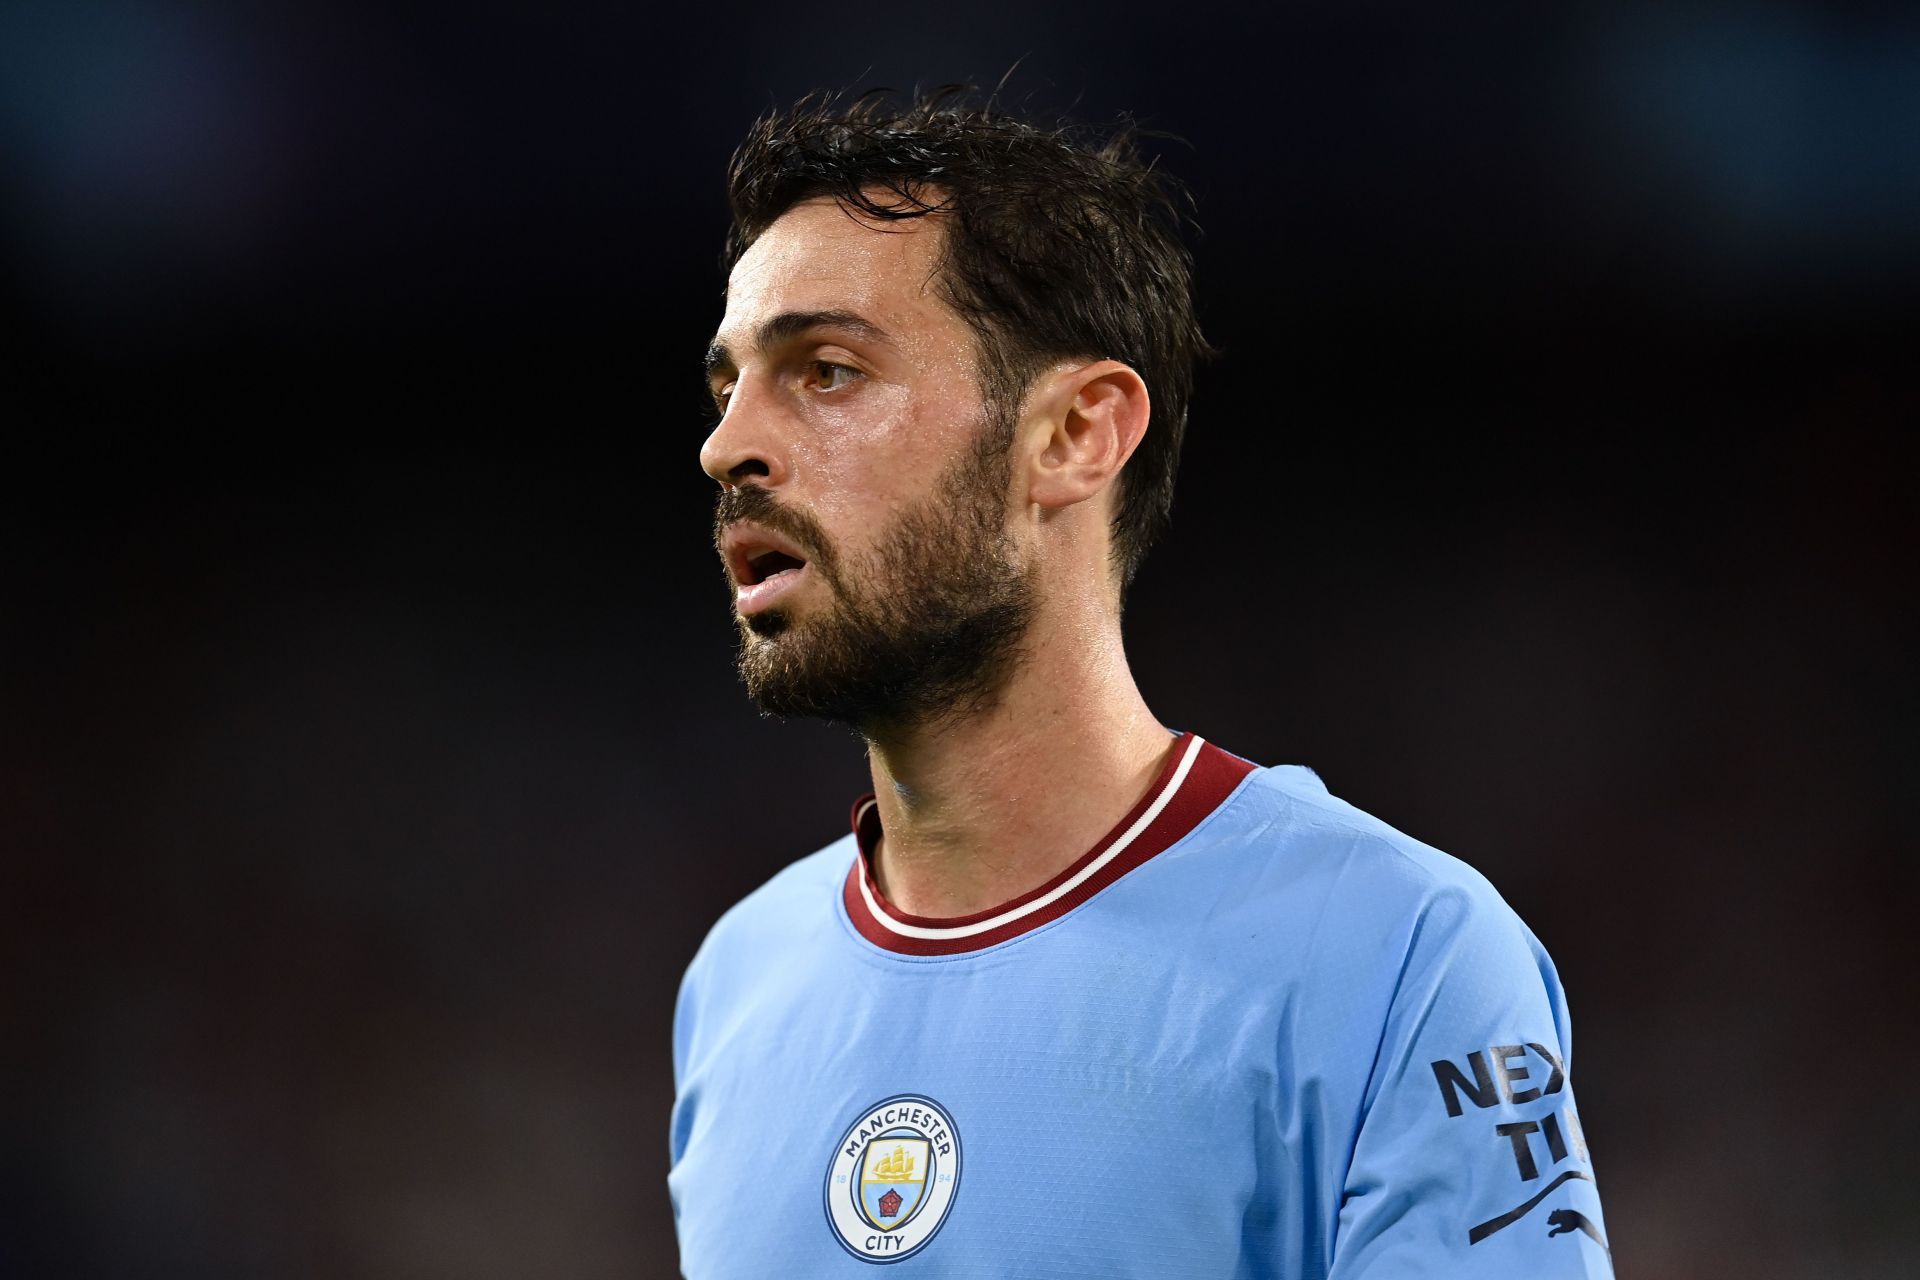 Bernardo Silva is one of the most versatile players in the Premier League